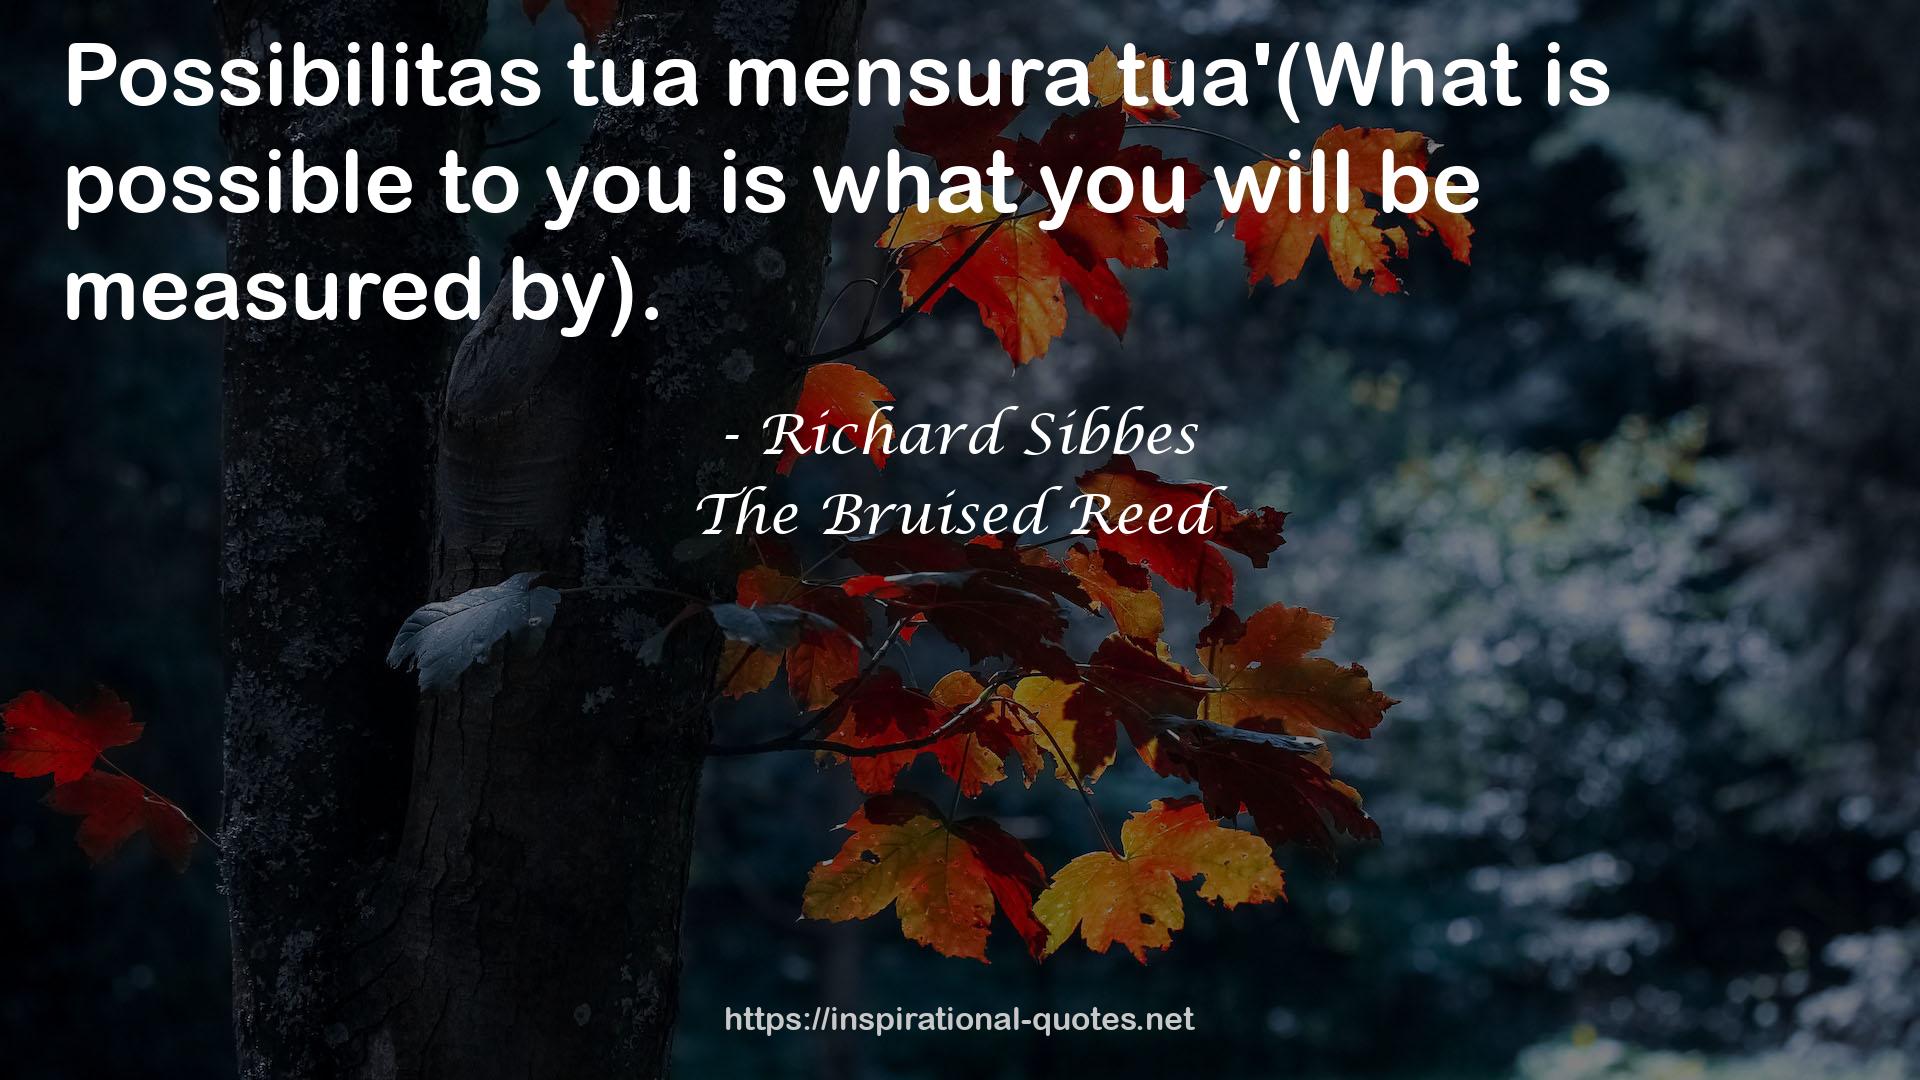 Richard Sibbes QUOTES